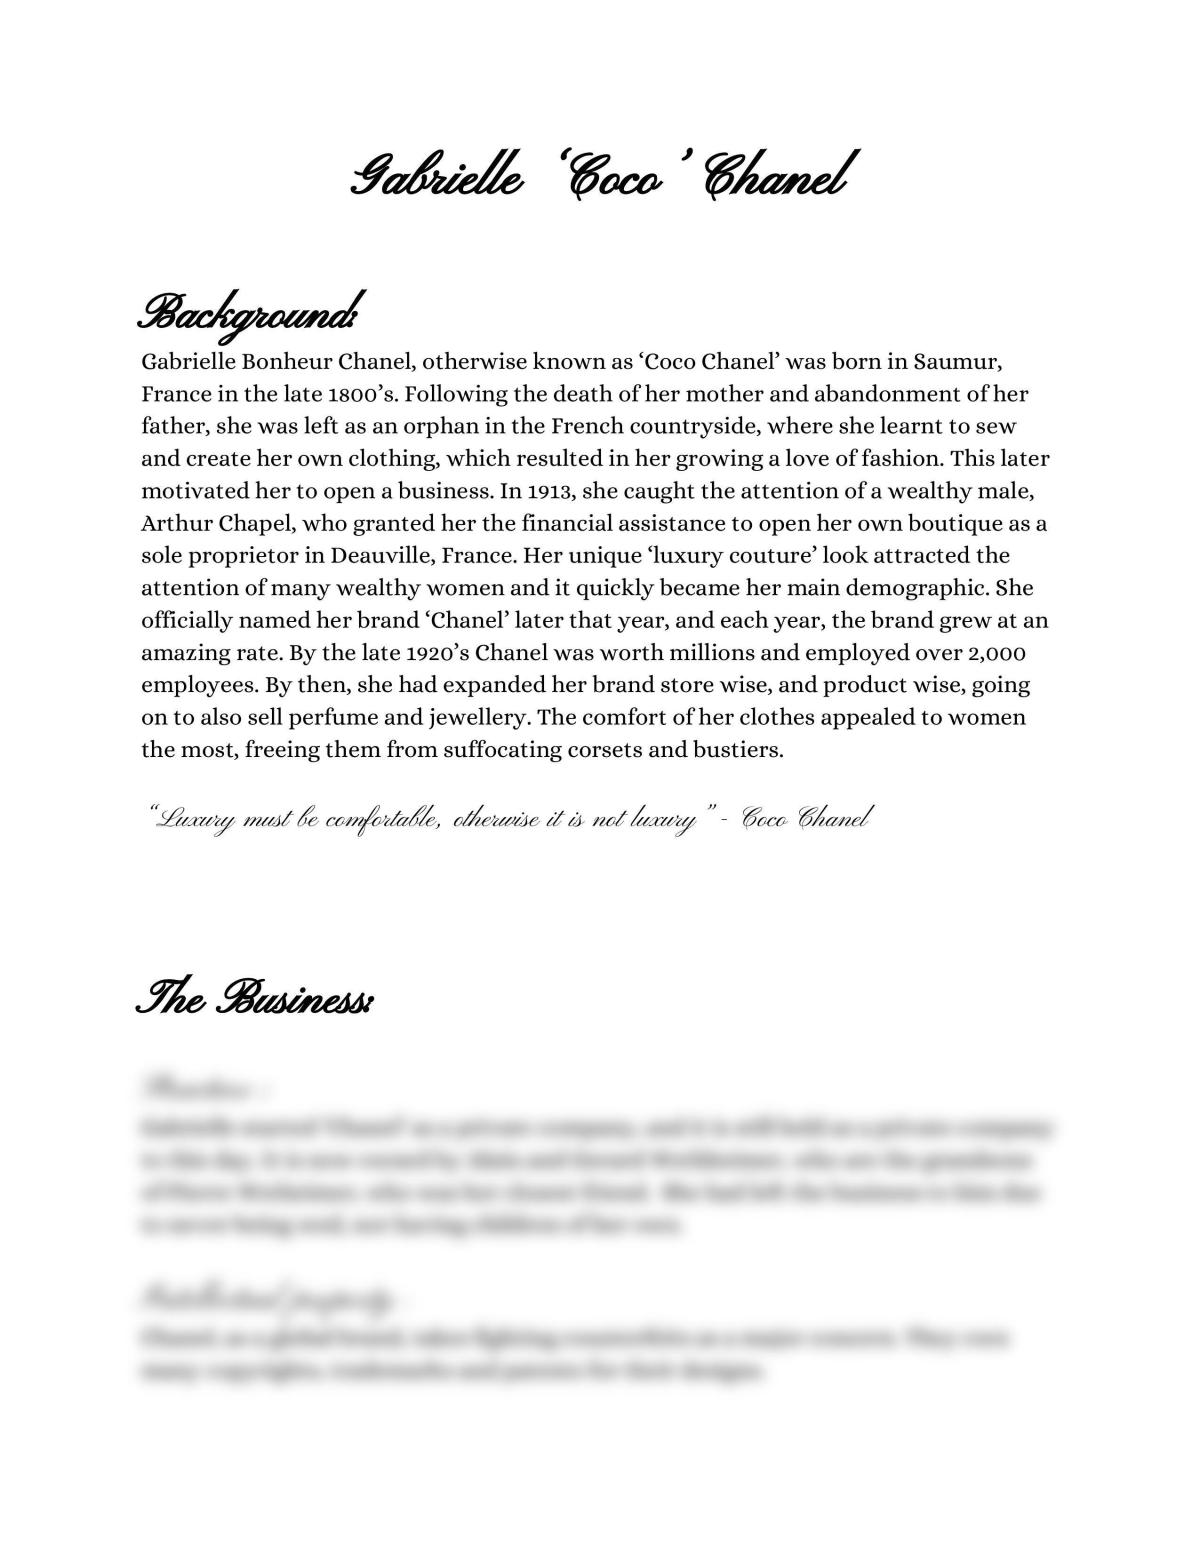 Louis Vuitton: Managing Corporate and Business Strategy Essay